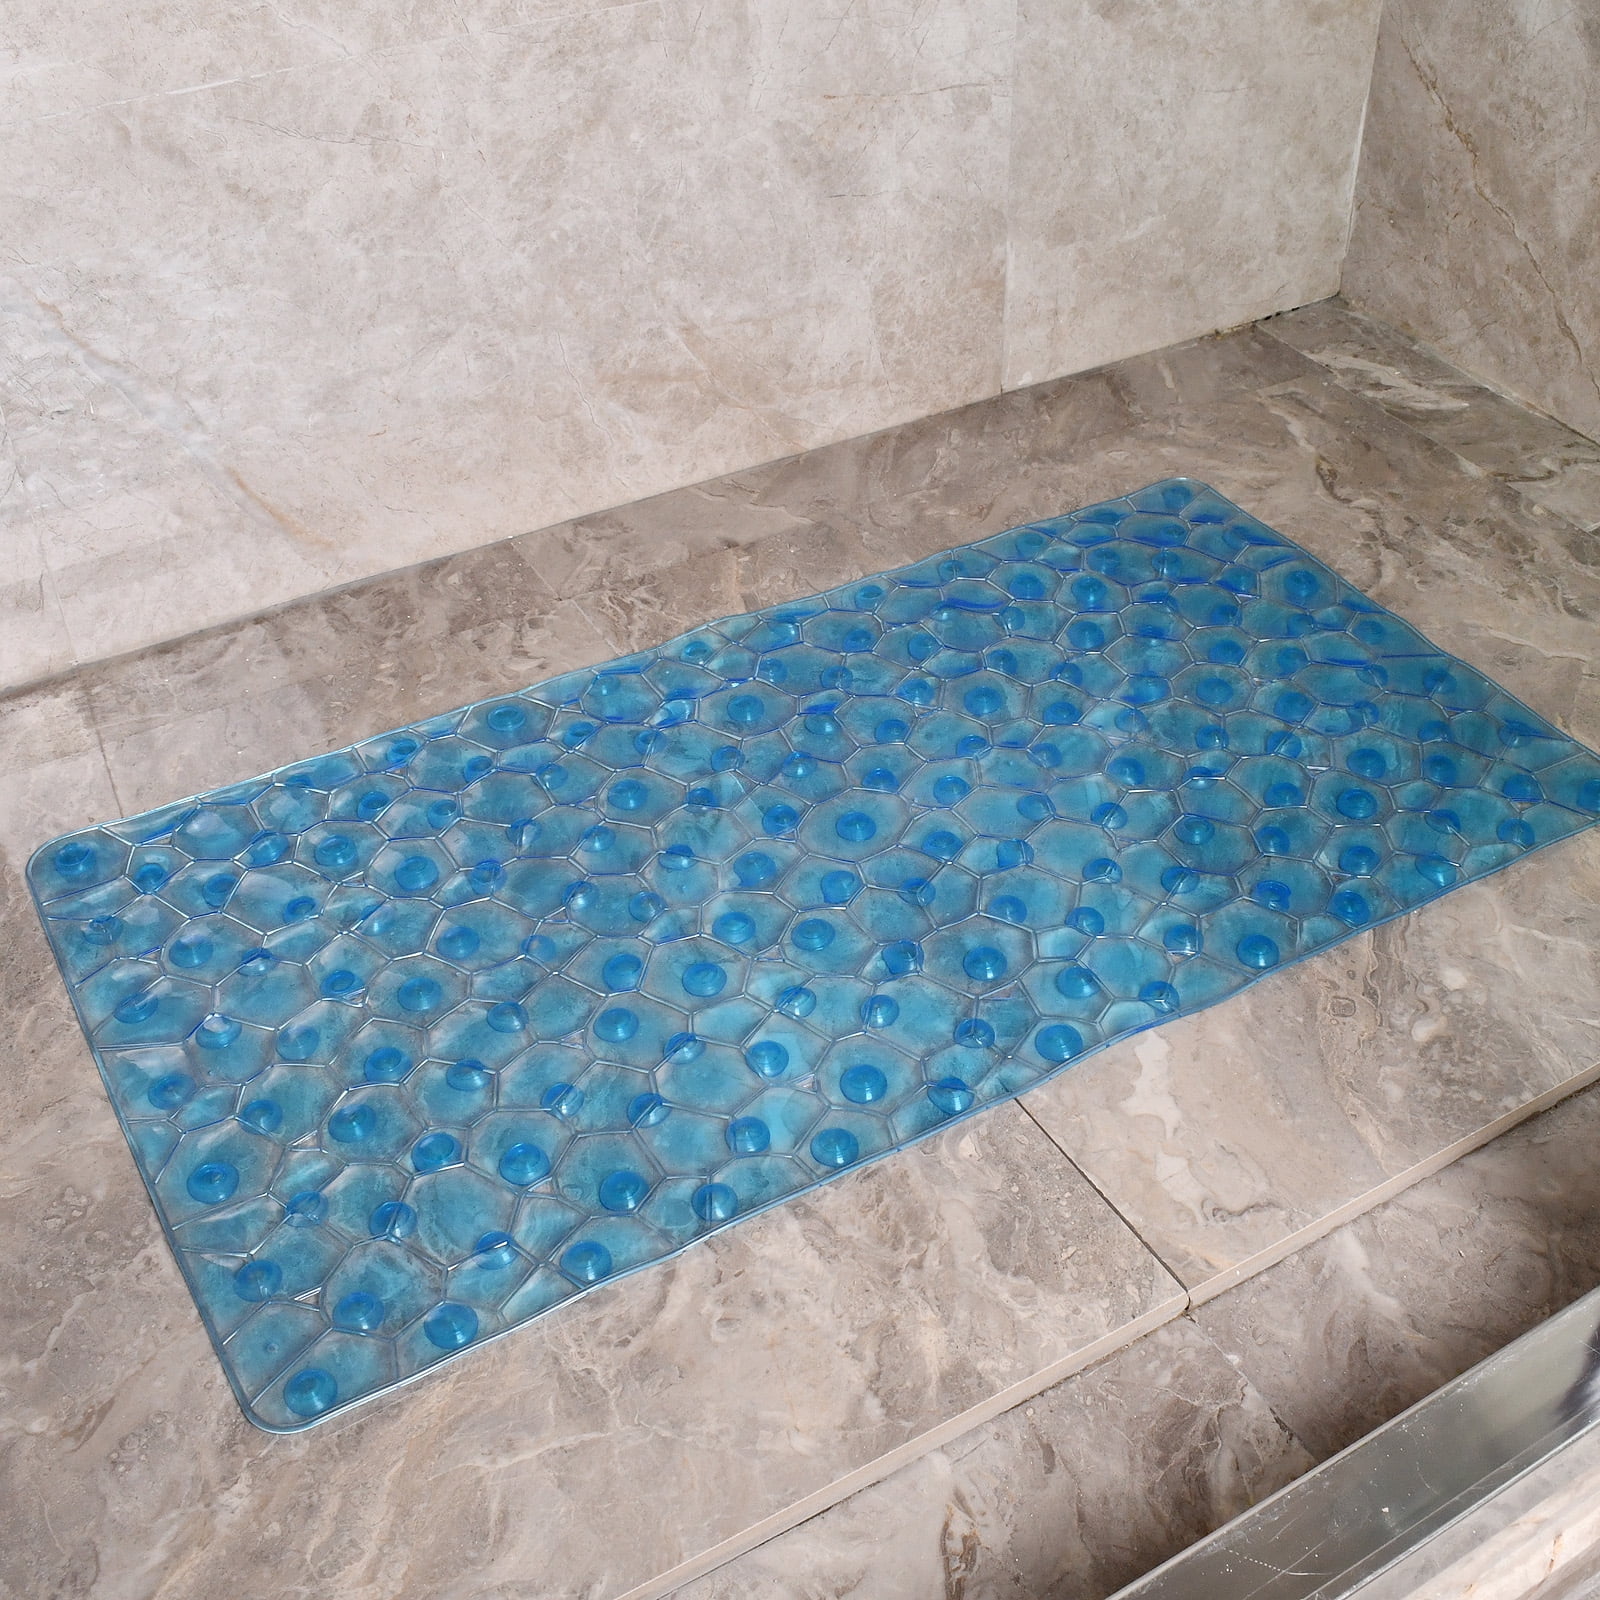 Tub and Shower Mats - Bed Bath & Beyond